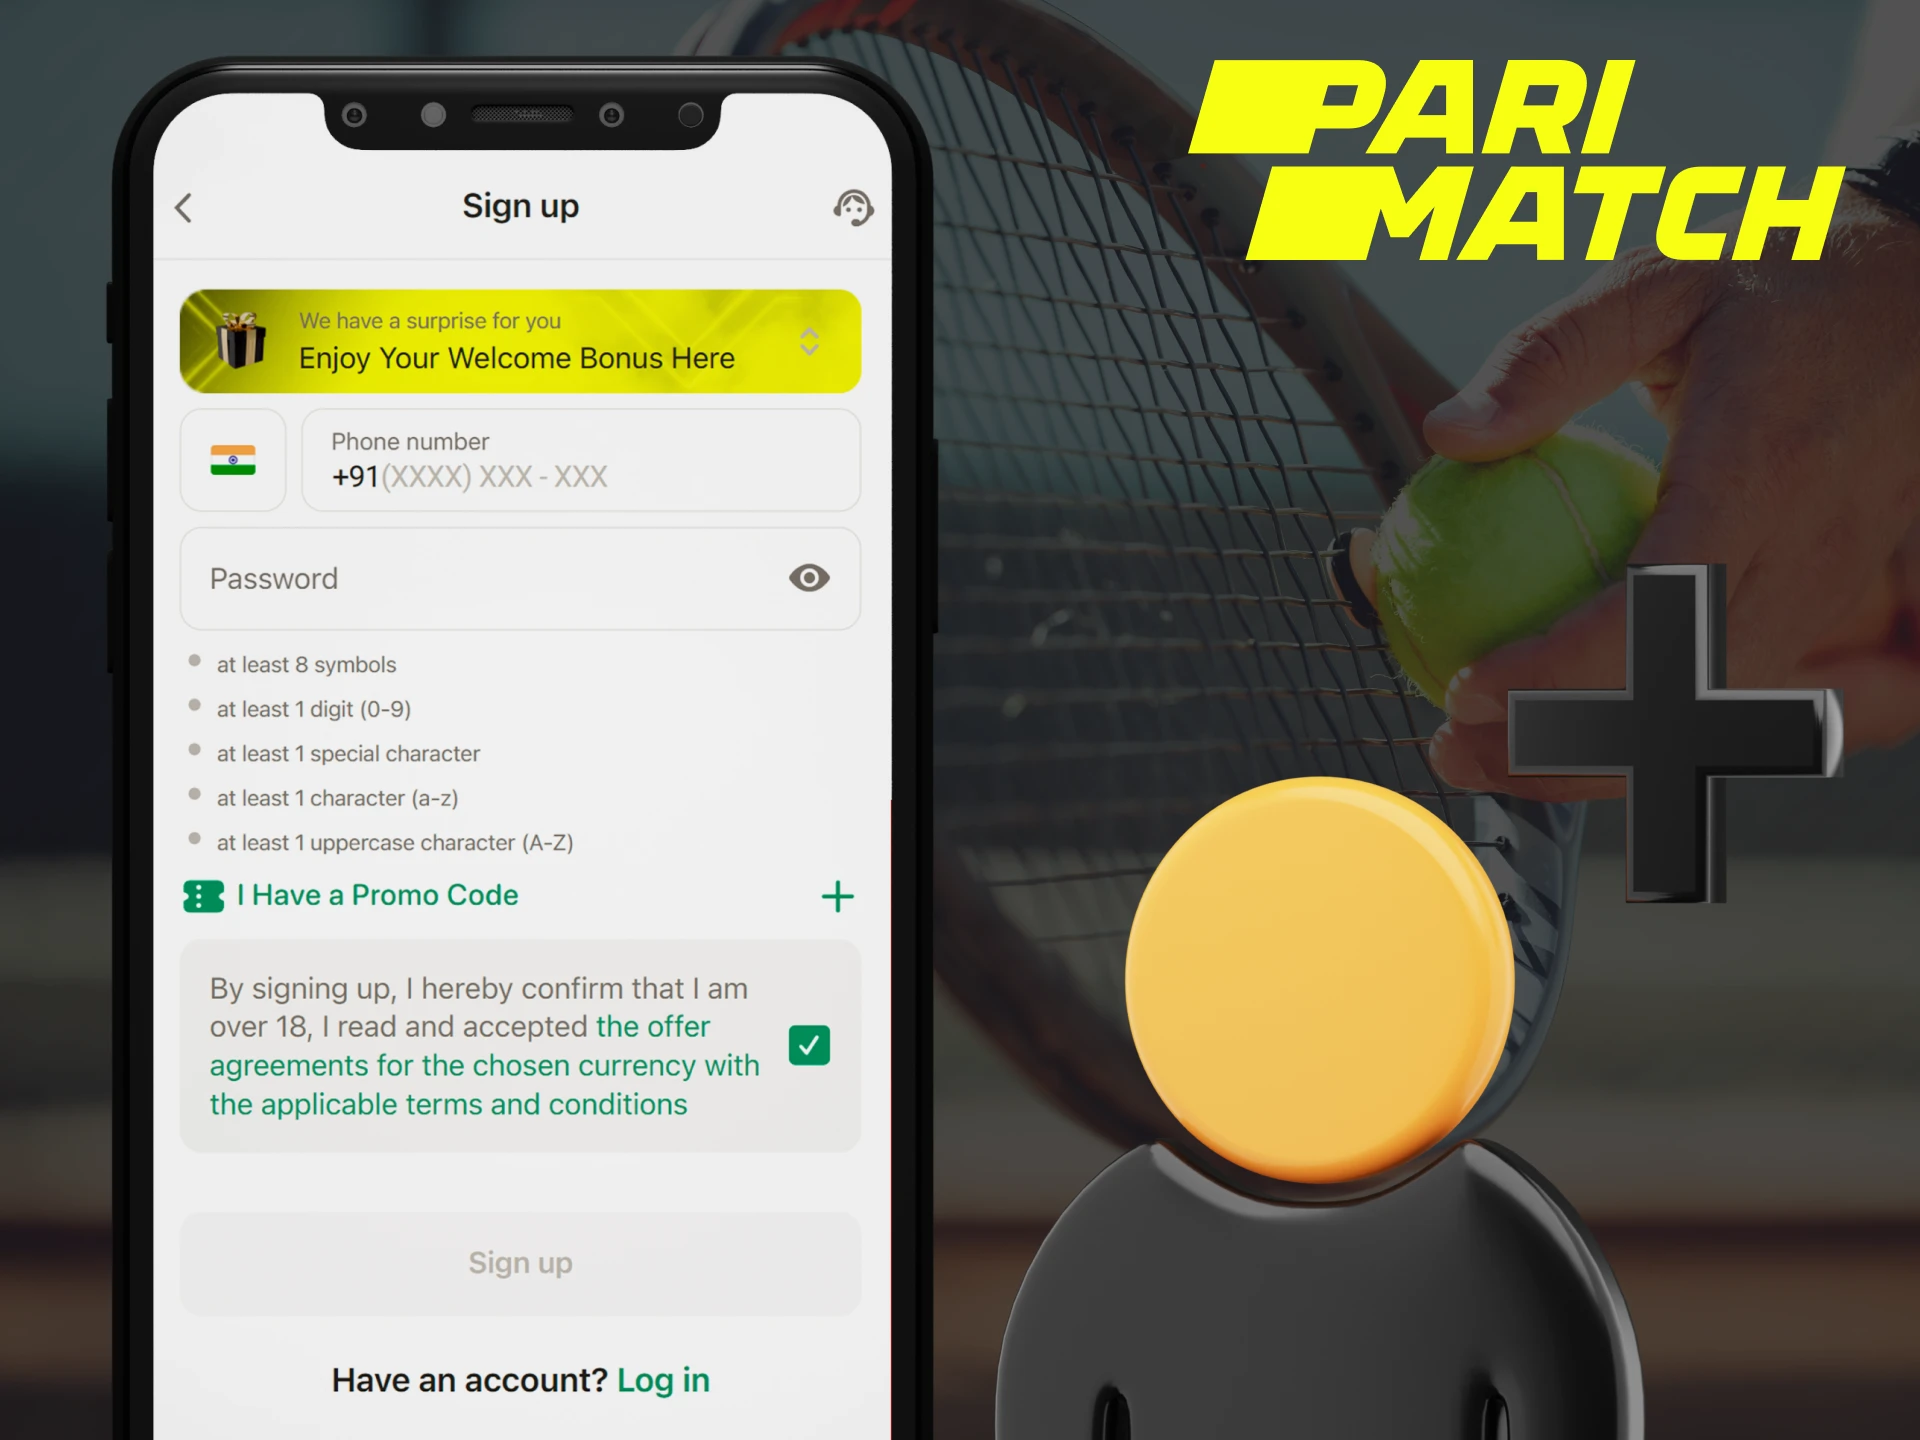 Register with Parimatch directly from the mobile app.